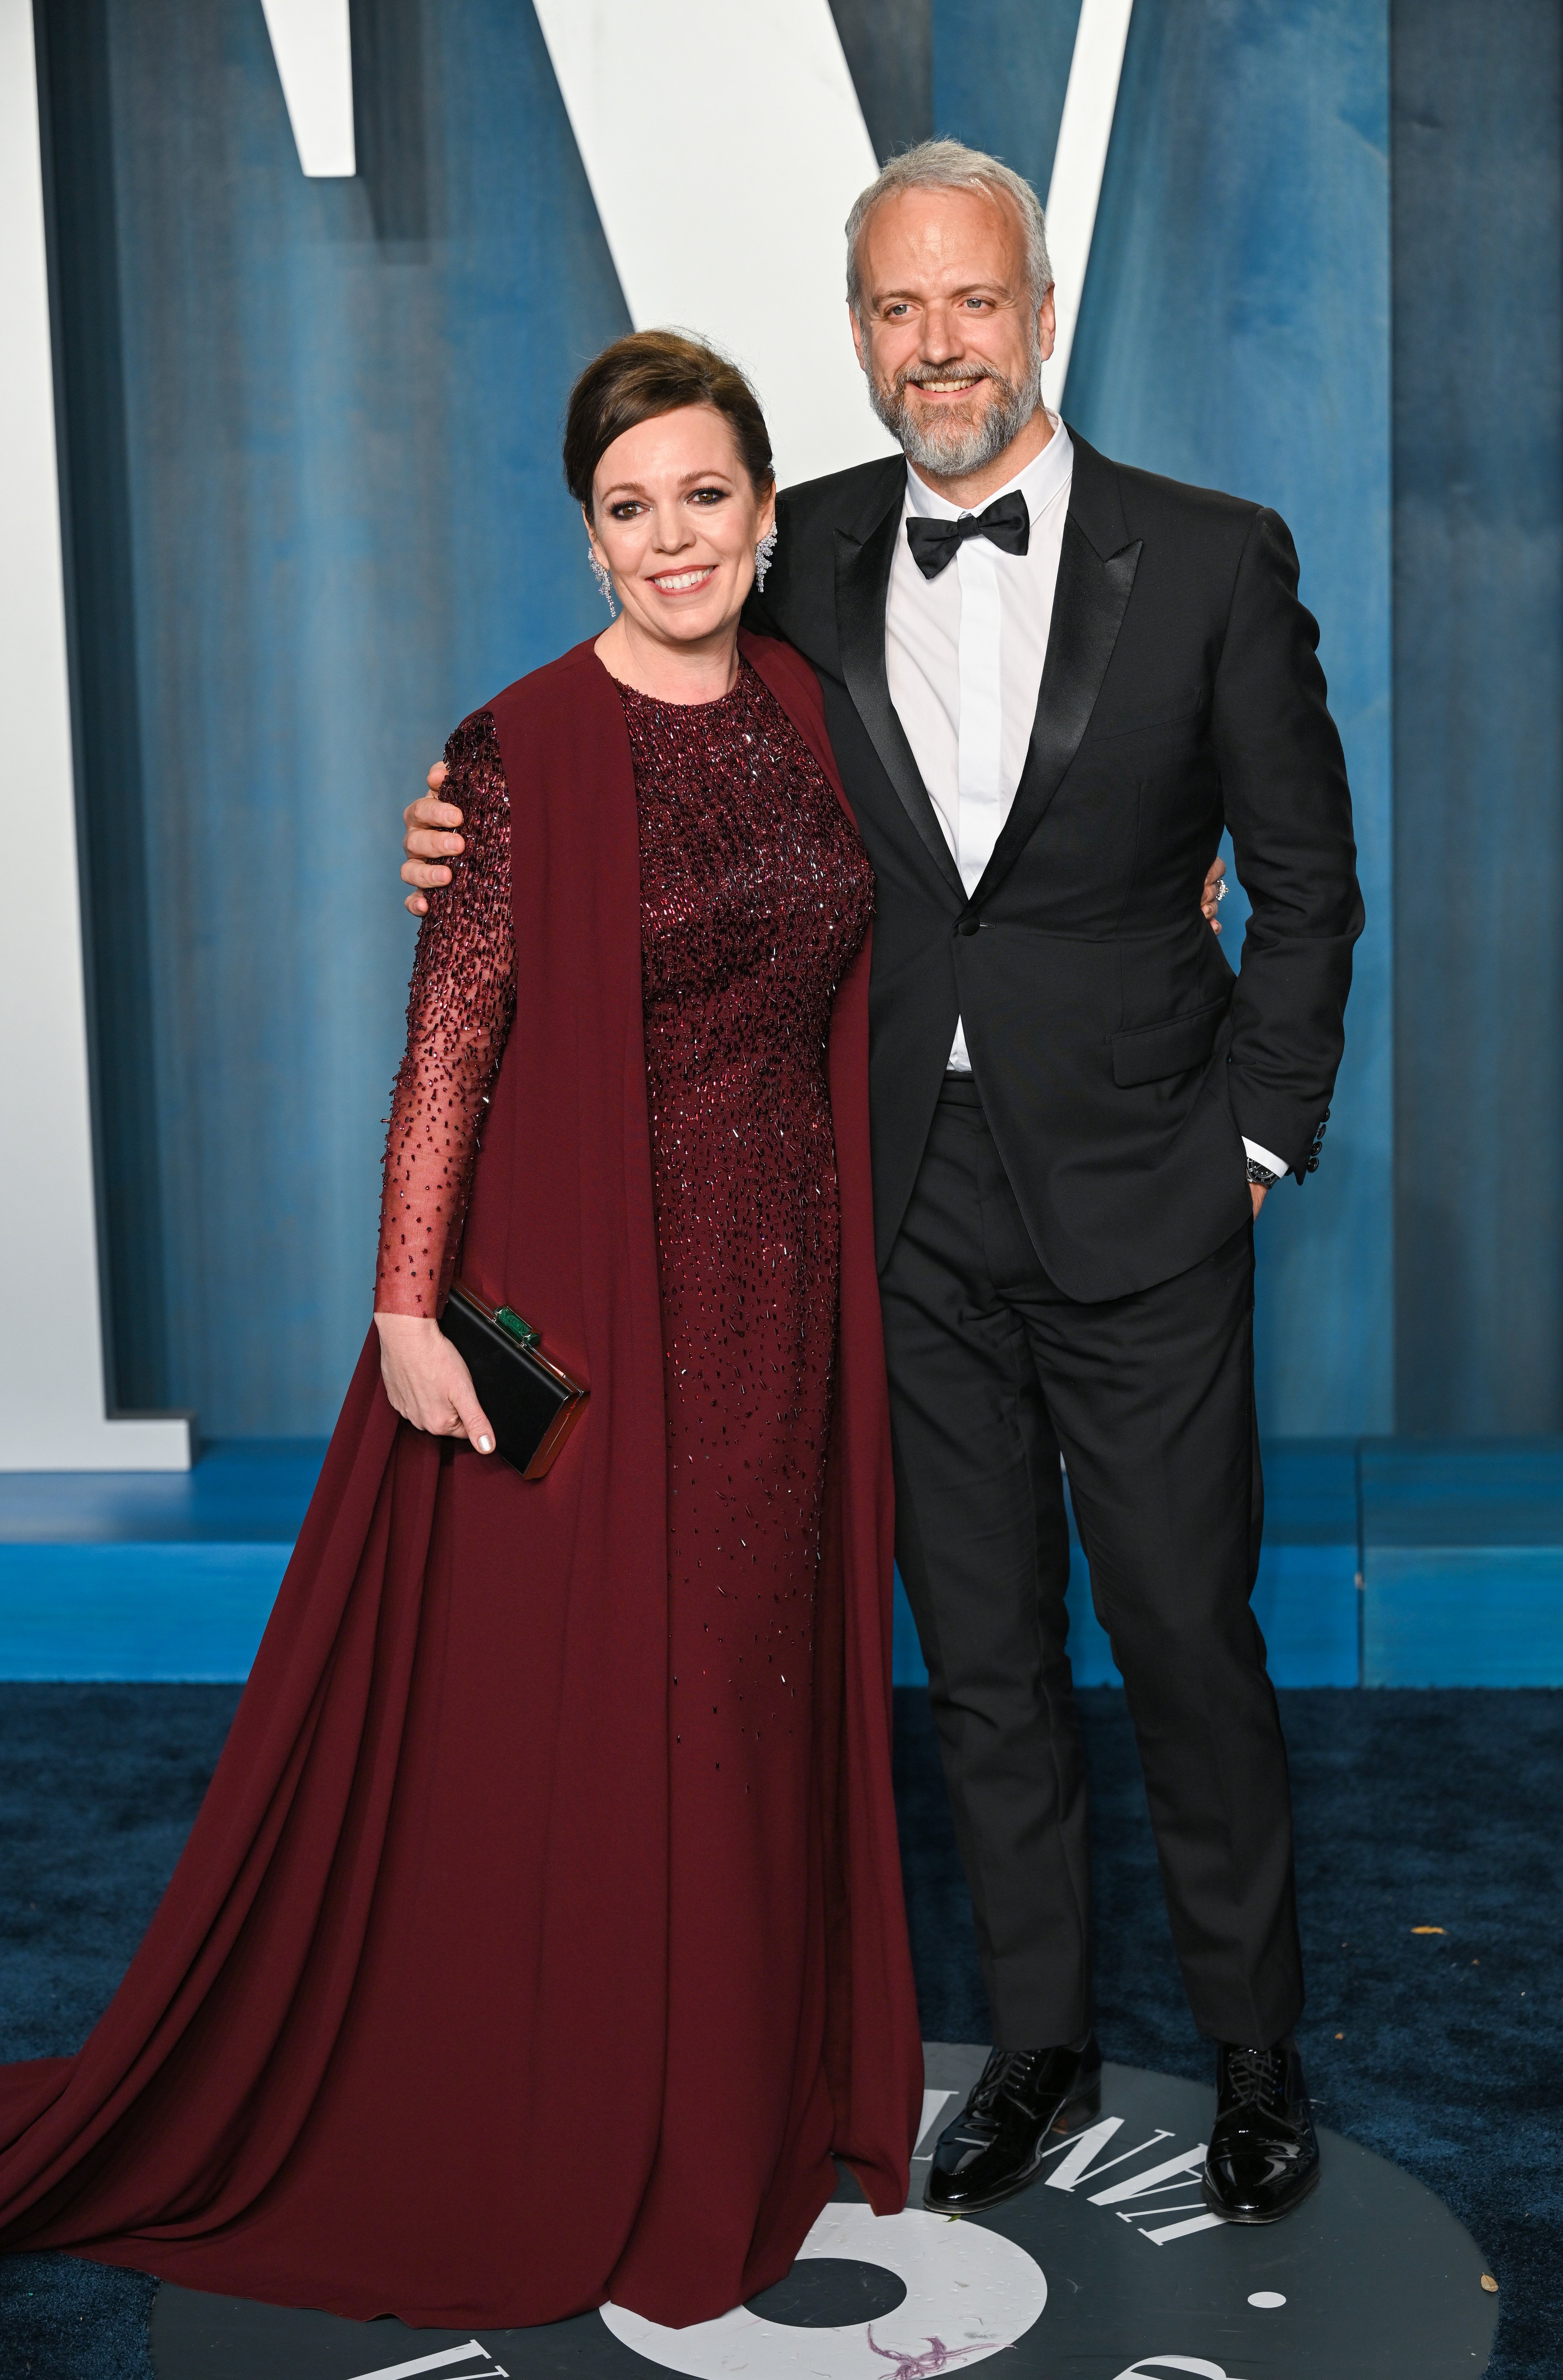 Ed Sinclair and his wife Olivia Colman at the premier of "Landscapers" in London, England on November 30, 2021 | Source: Getty Images 